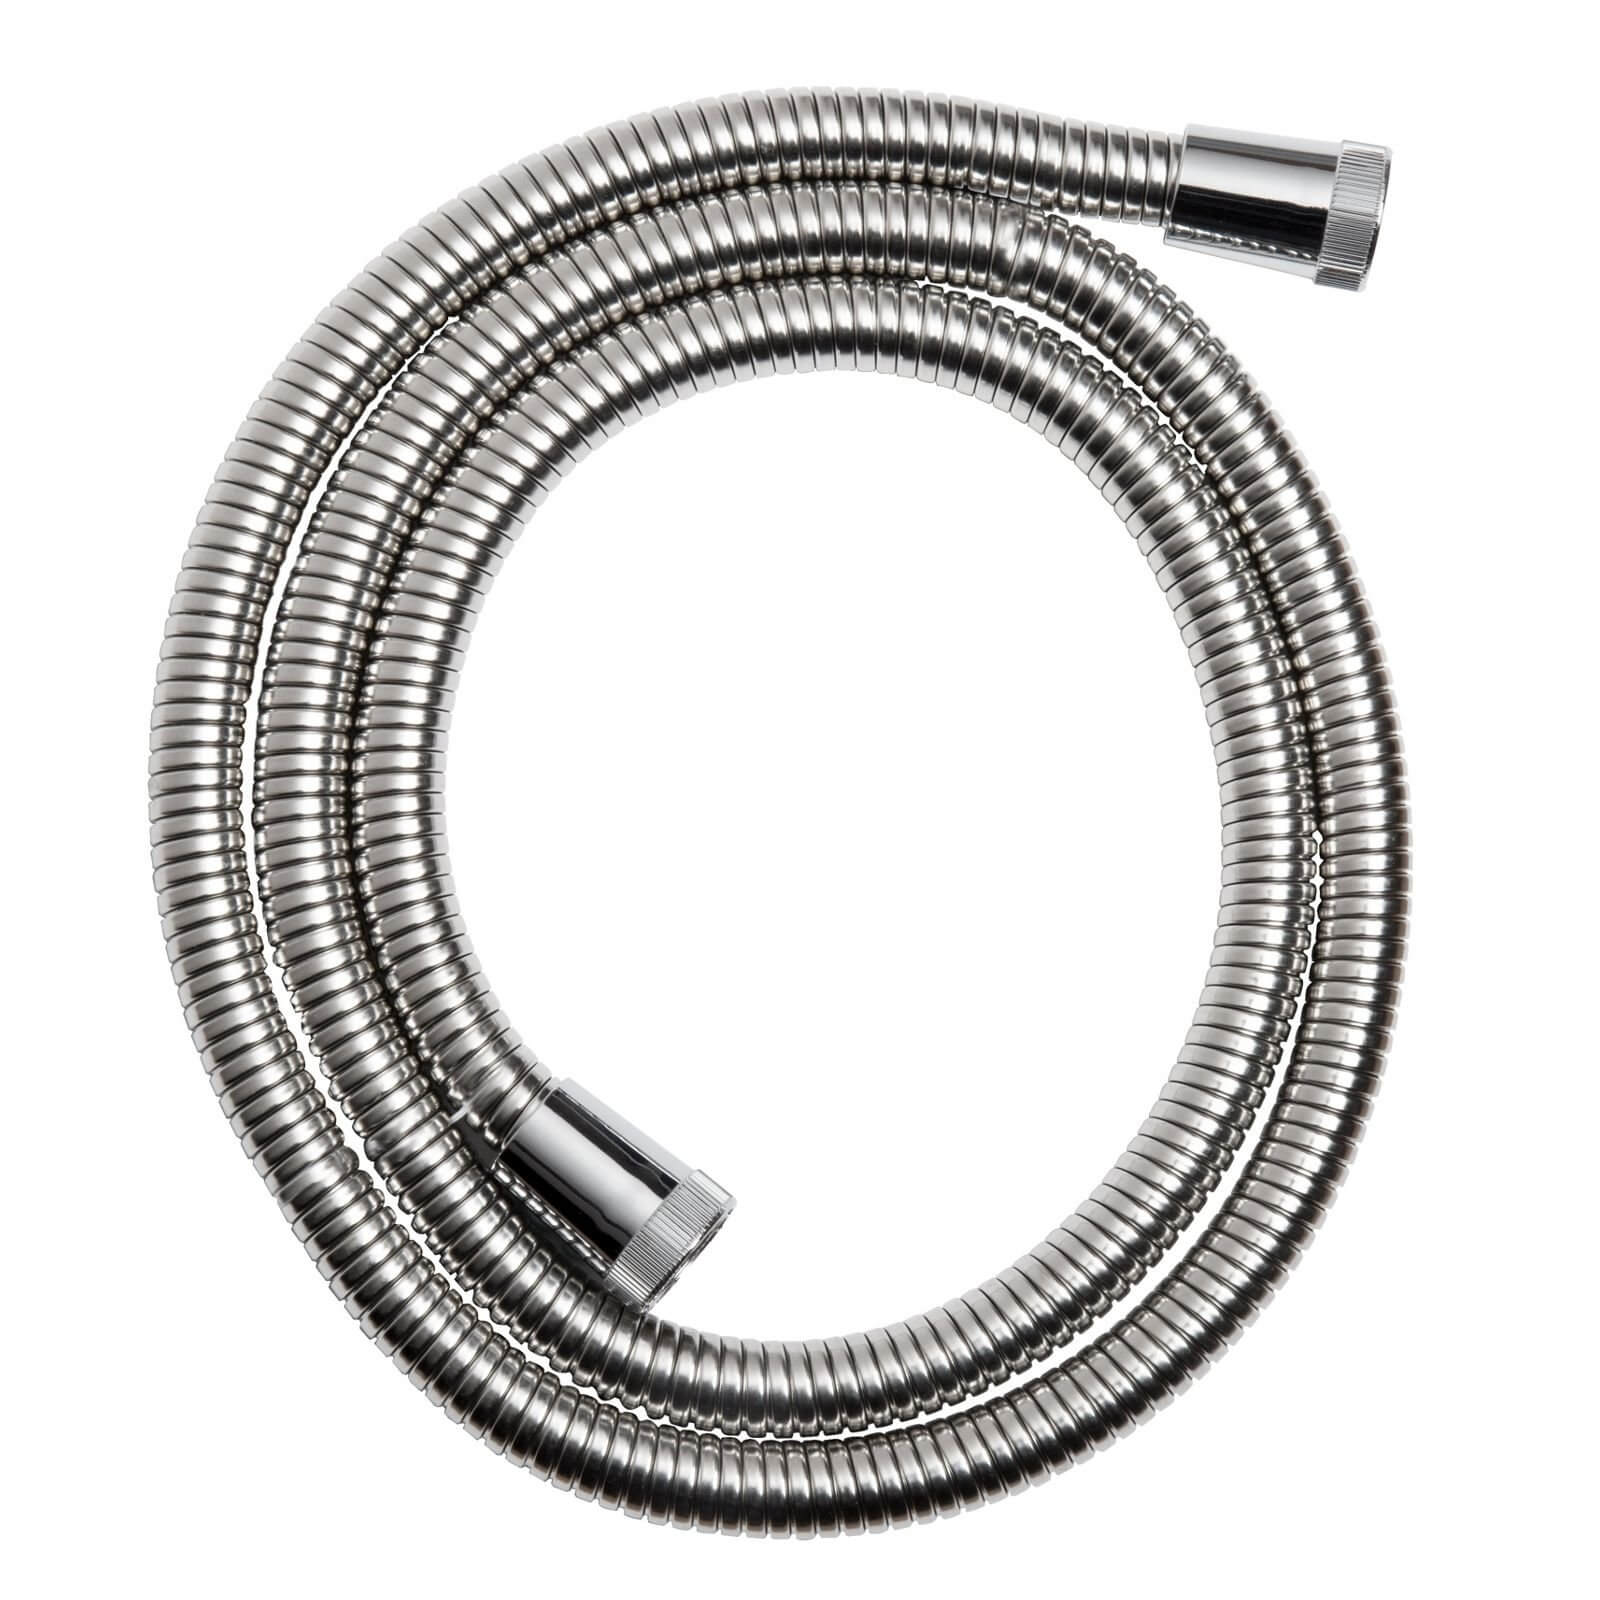 Croydex Double Wound Stretch Hose - 1.5 to 1.75m